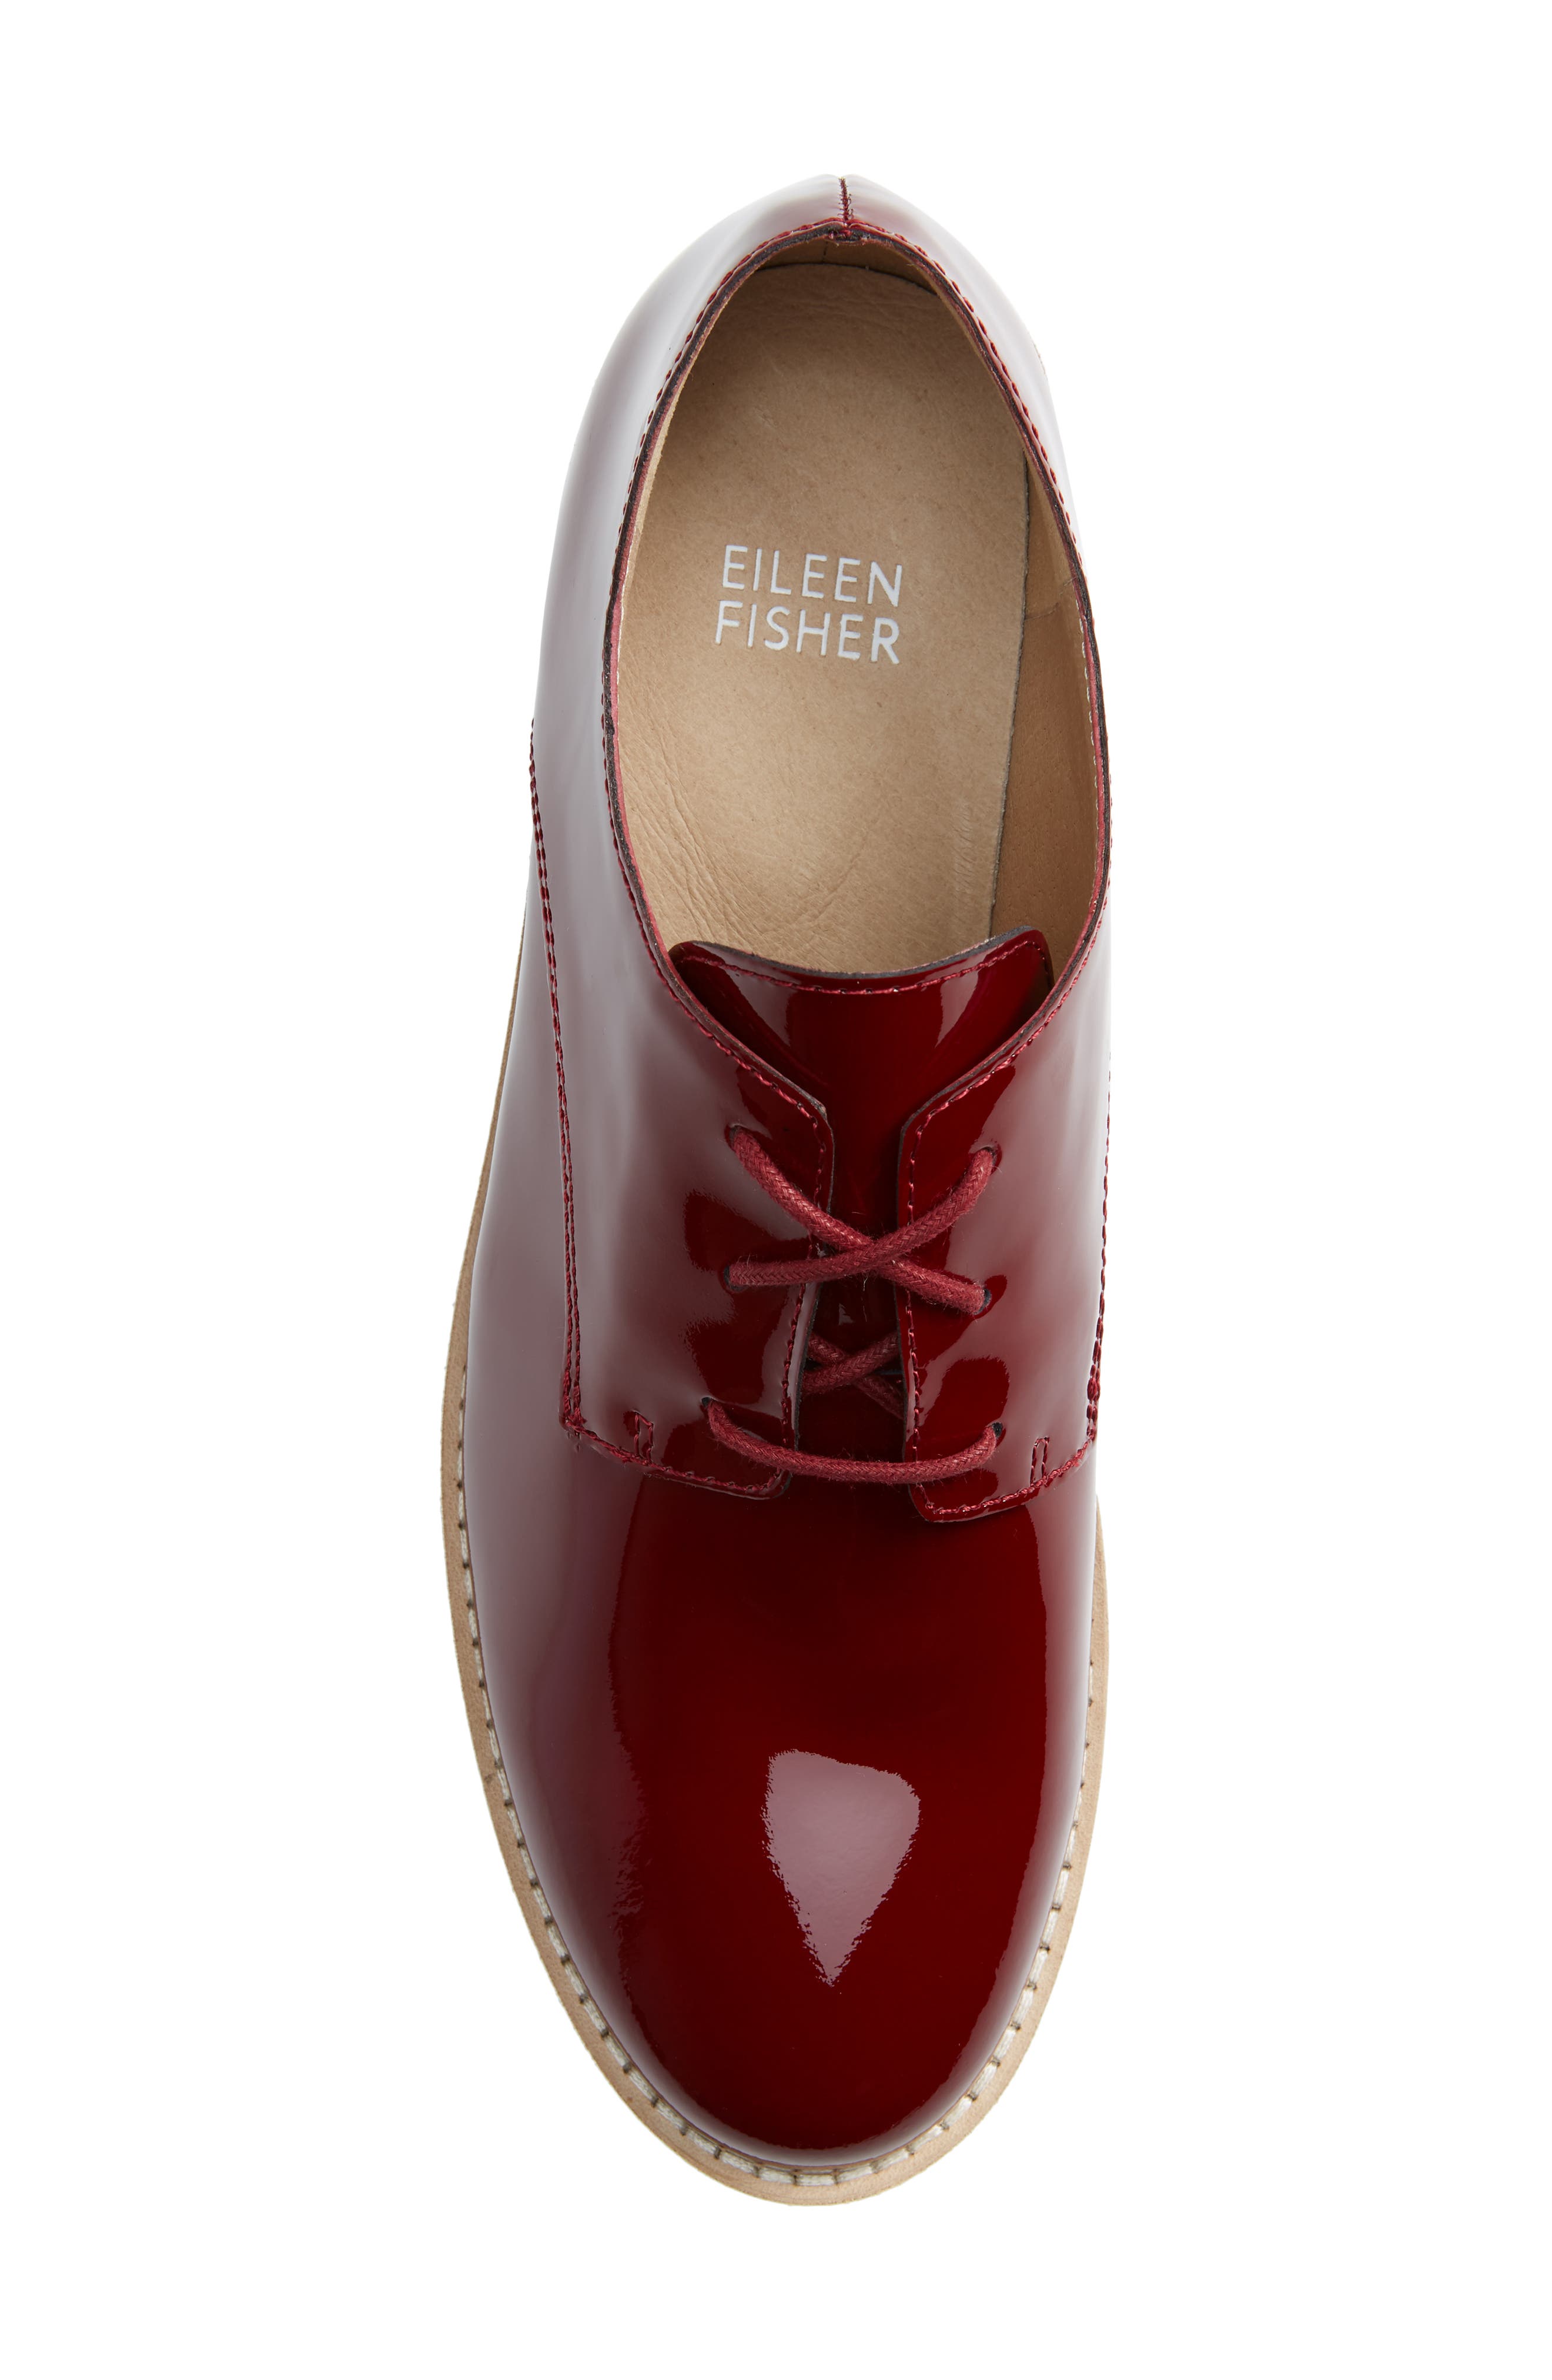 eileen fisher red shoes